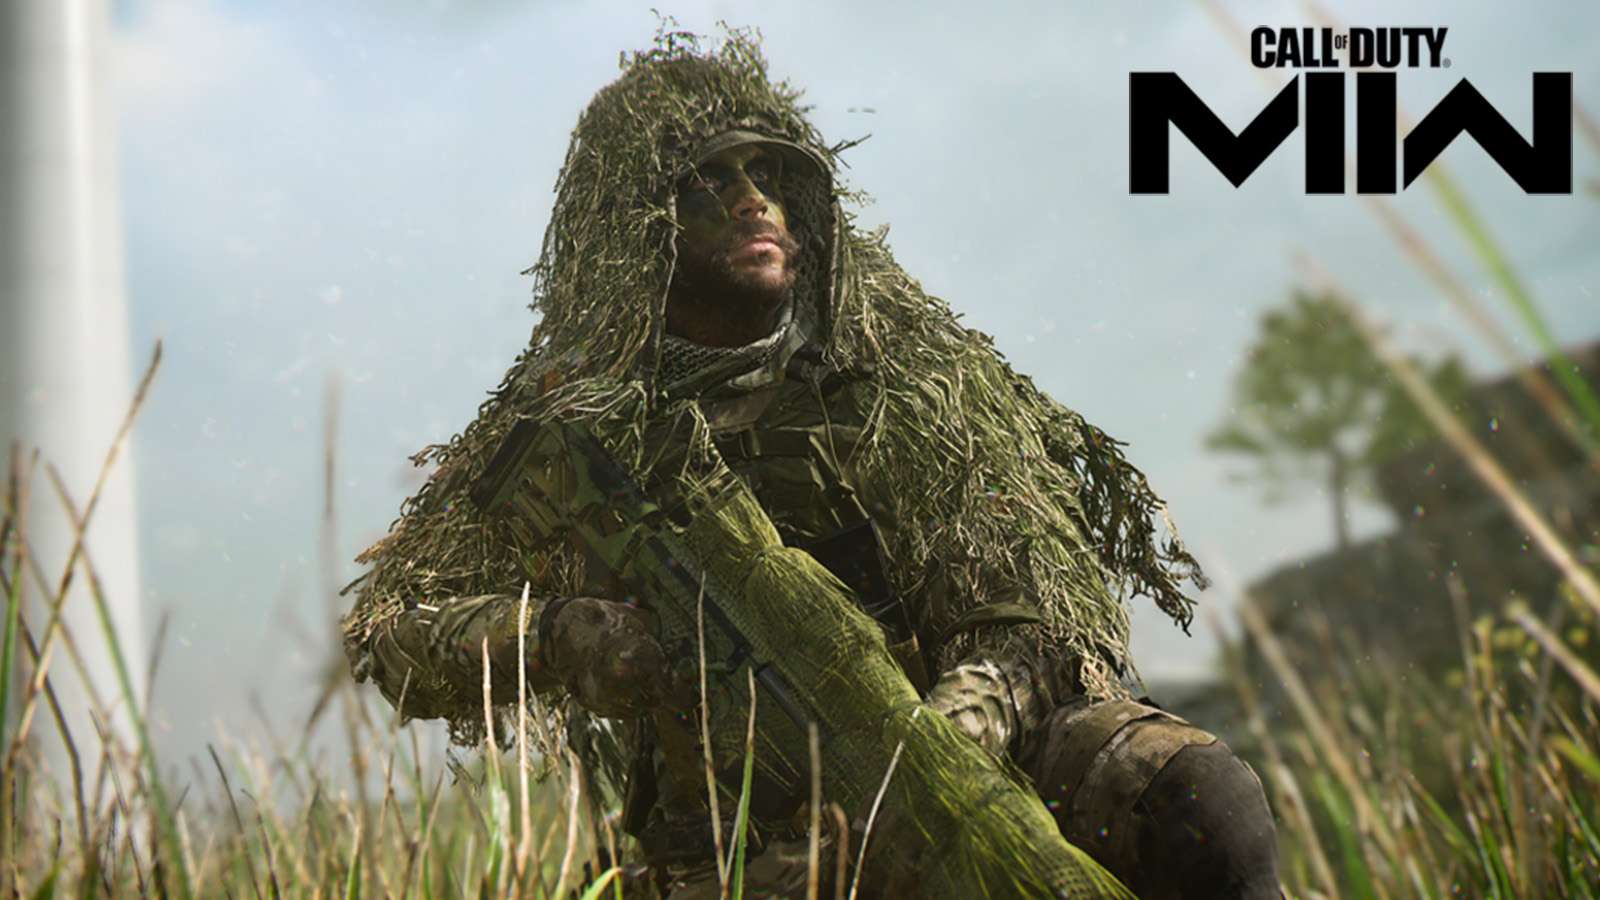 Modern Warfare 2 character with ghilly suit and MWII logo